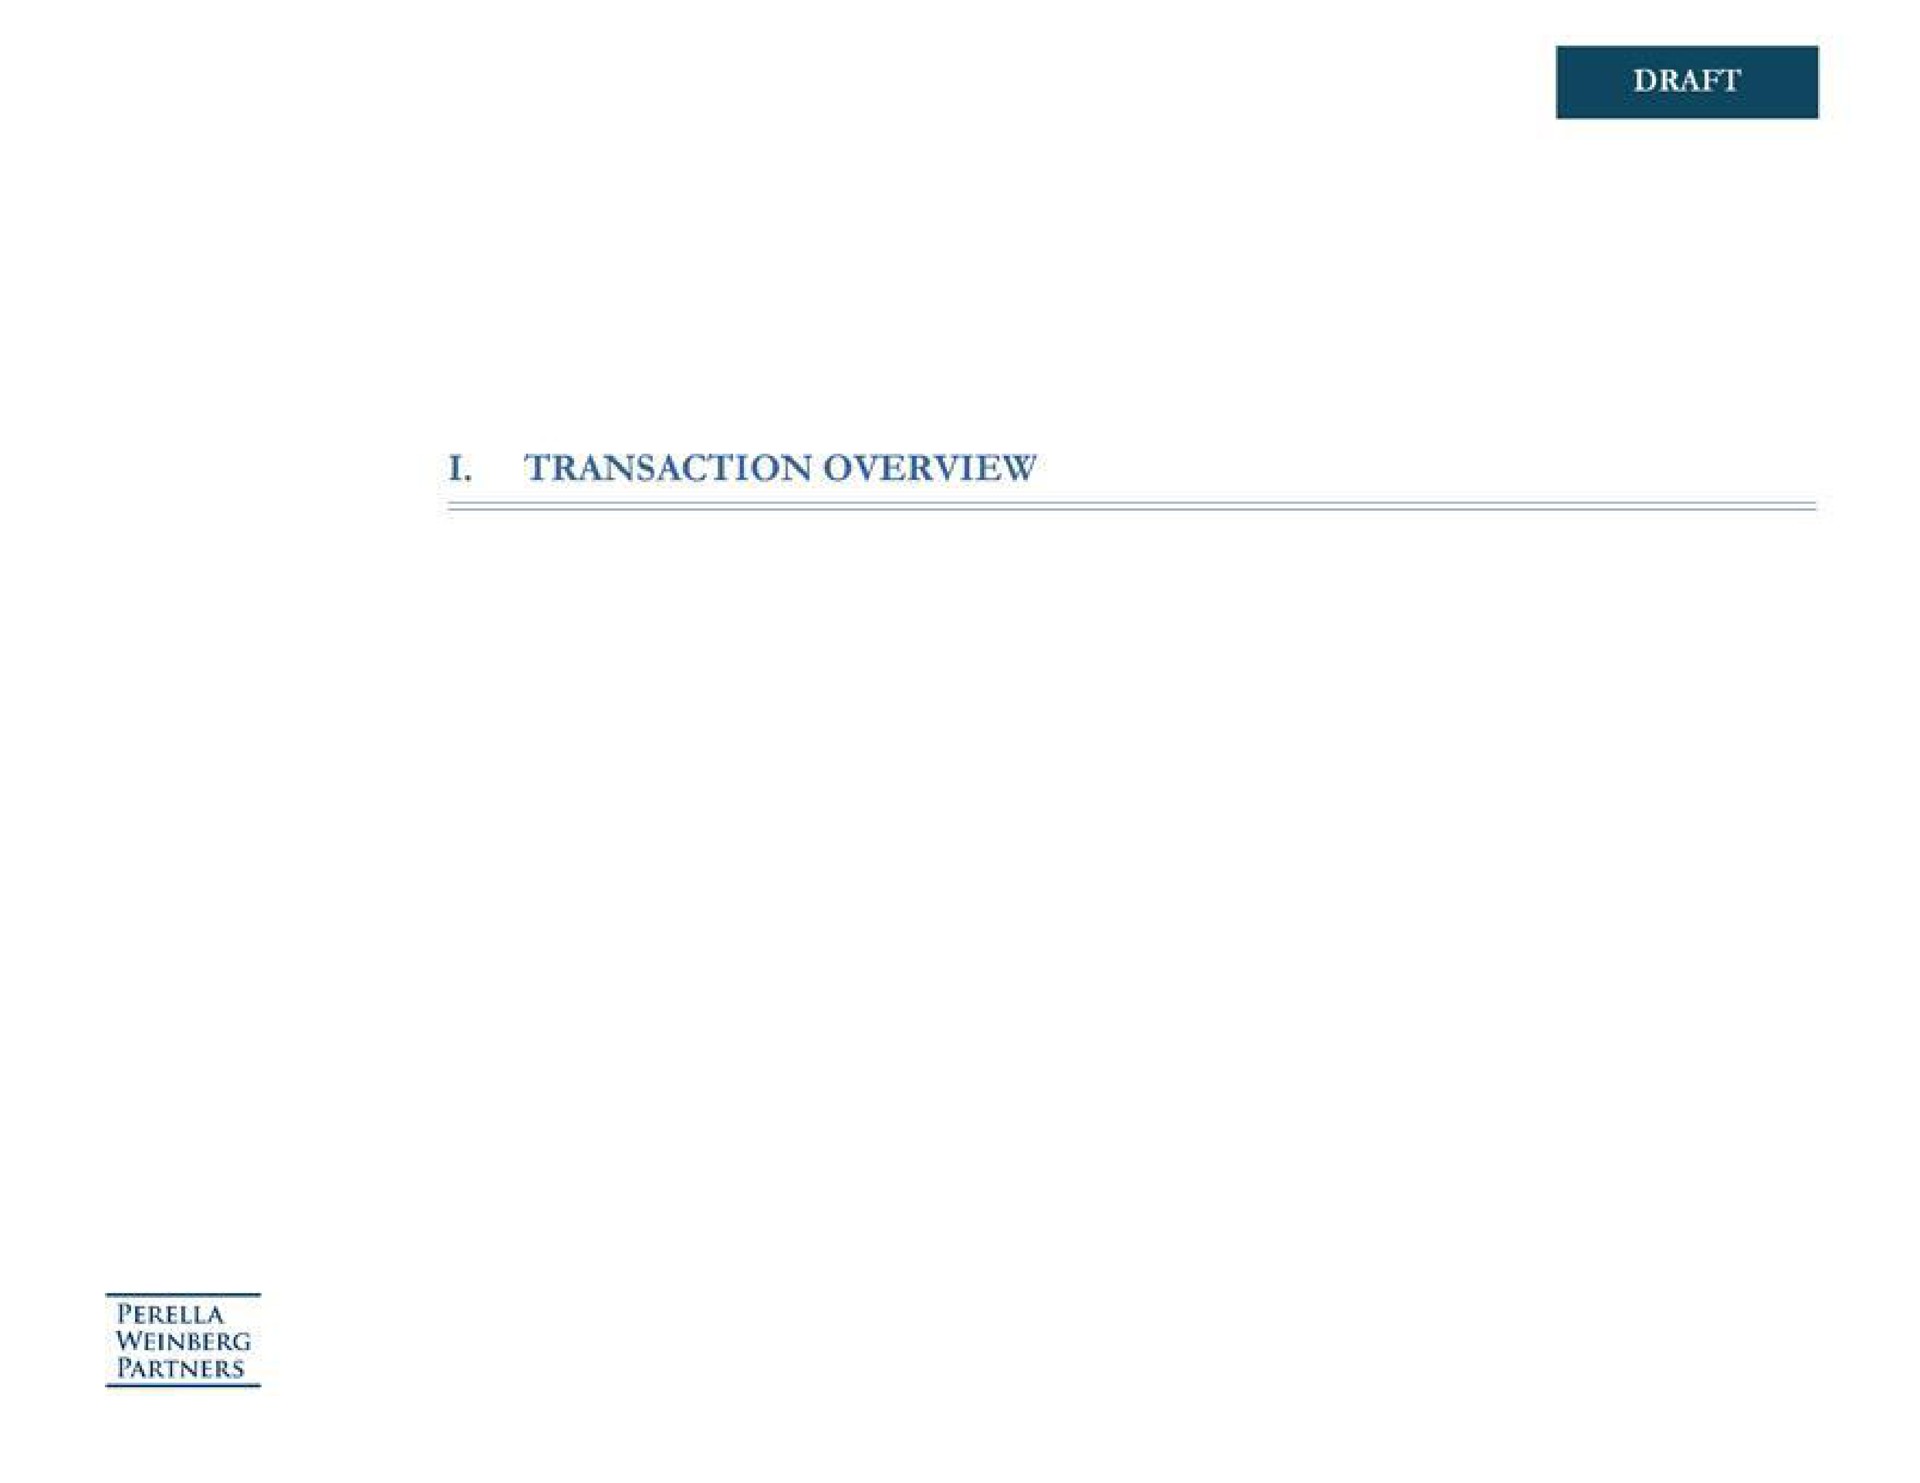 i transaction overview | Perella Weinberg Partners